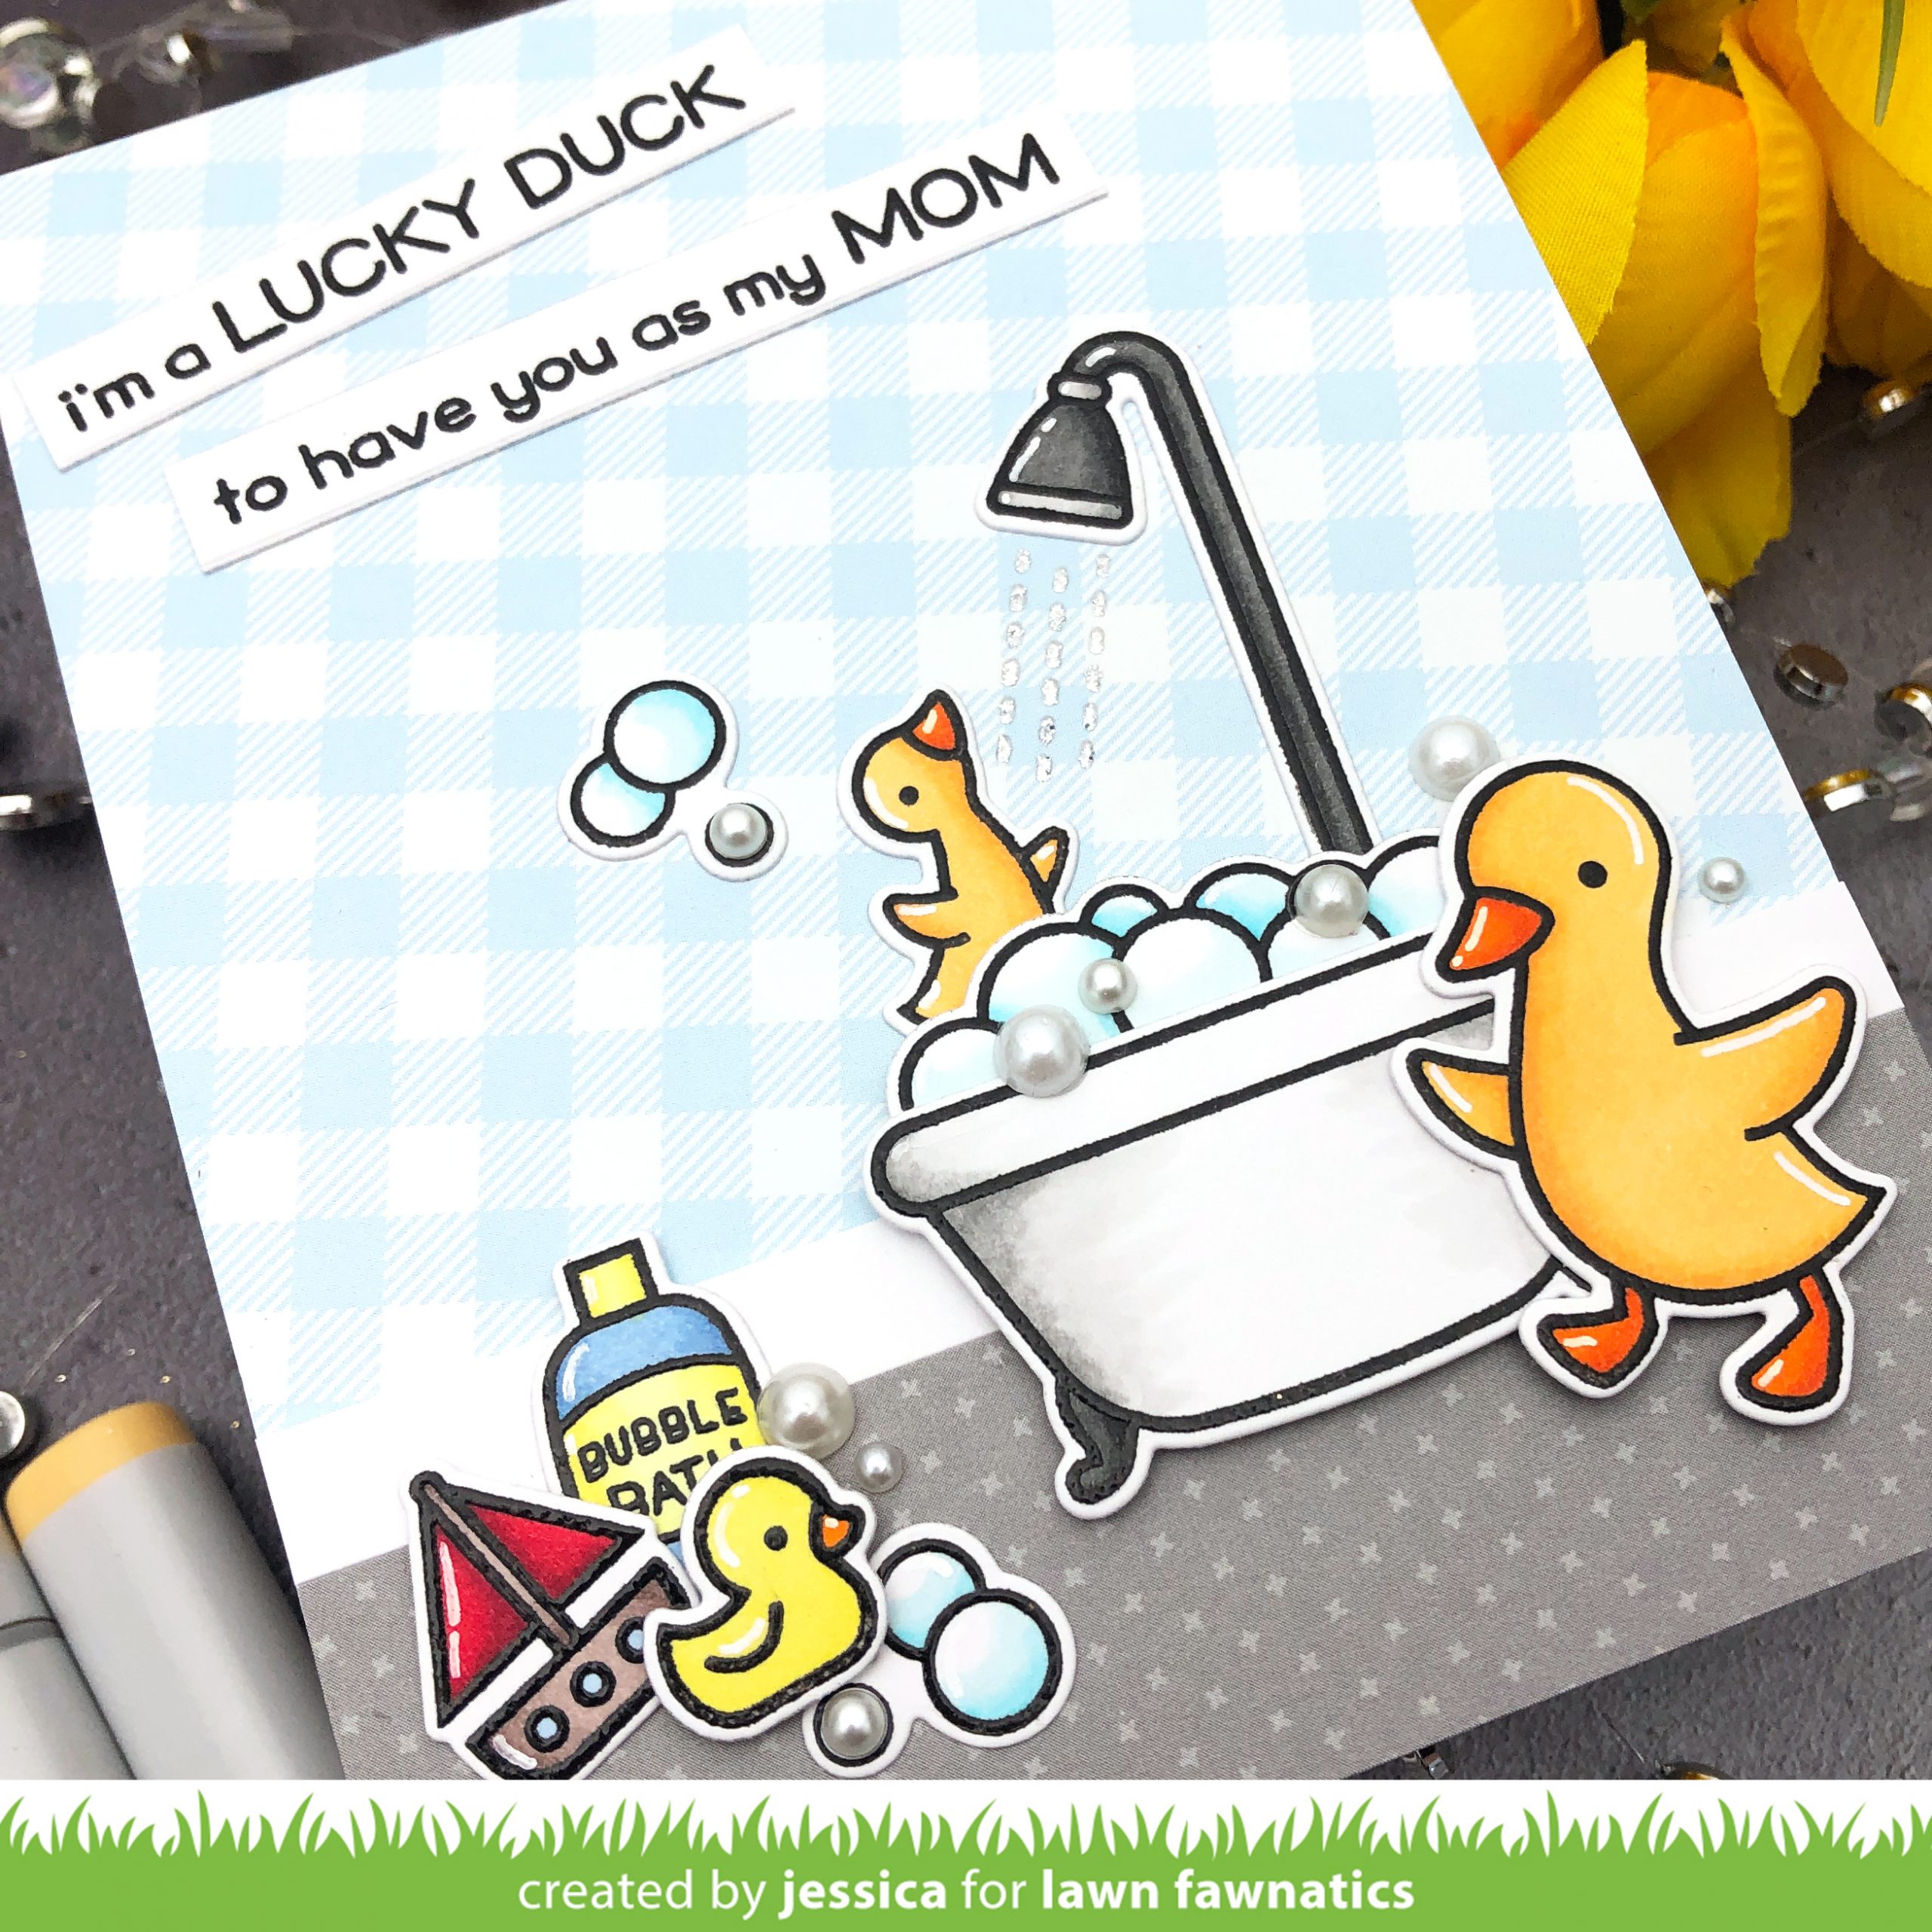 Lucky Duck by Jessica Frost-Ballas for Lawn Fawn